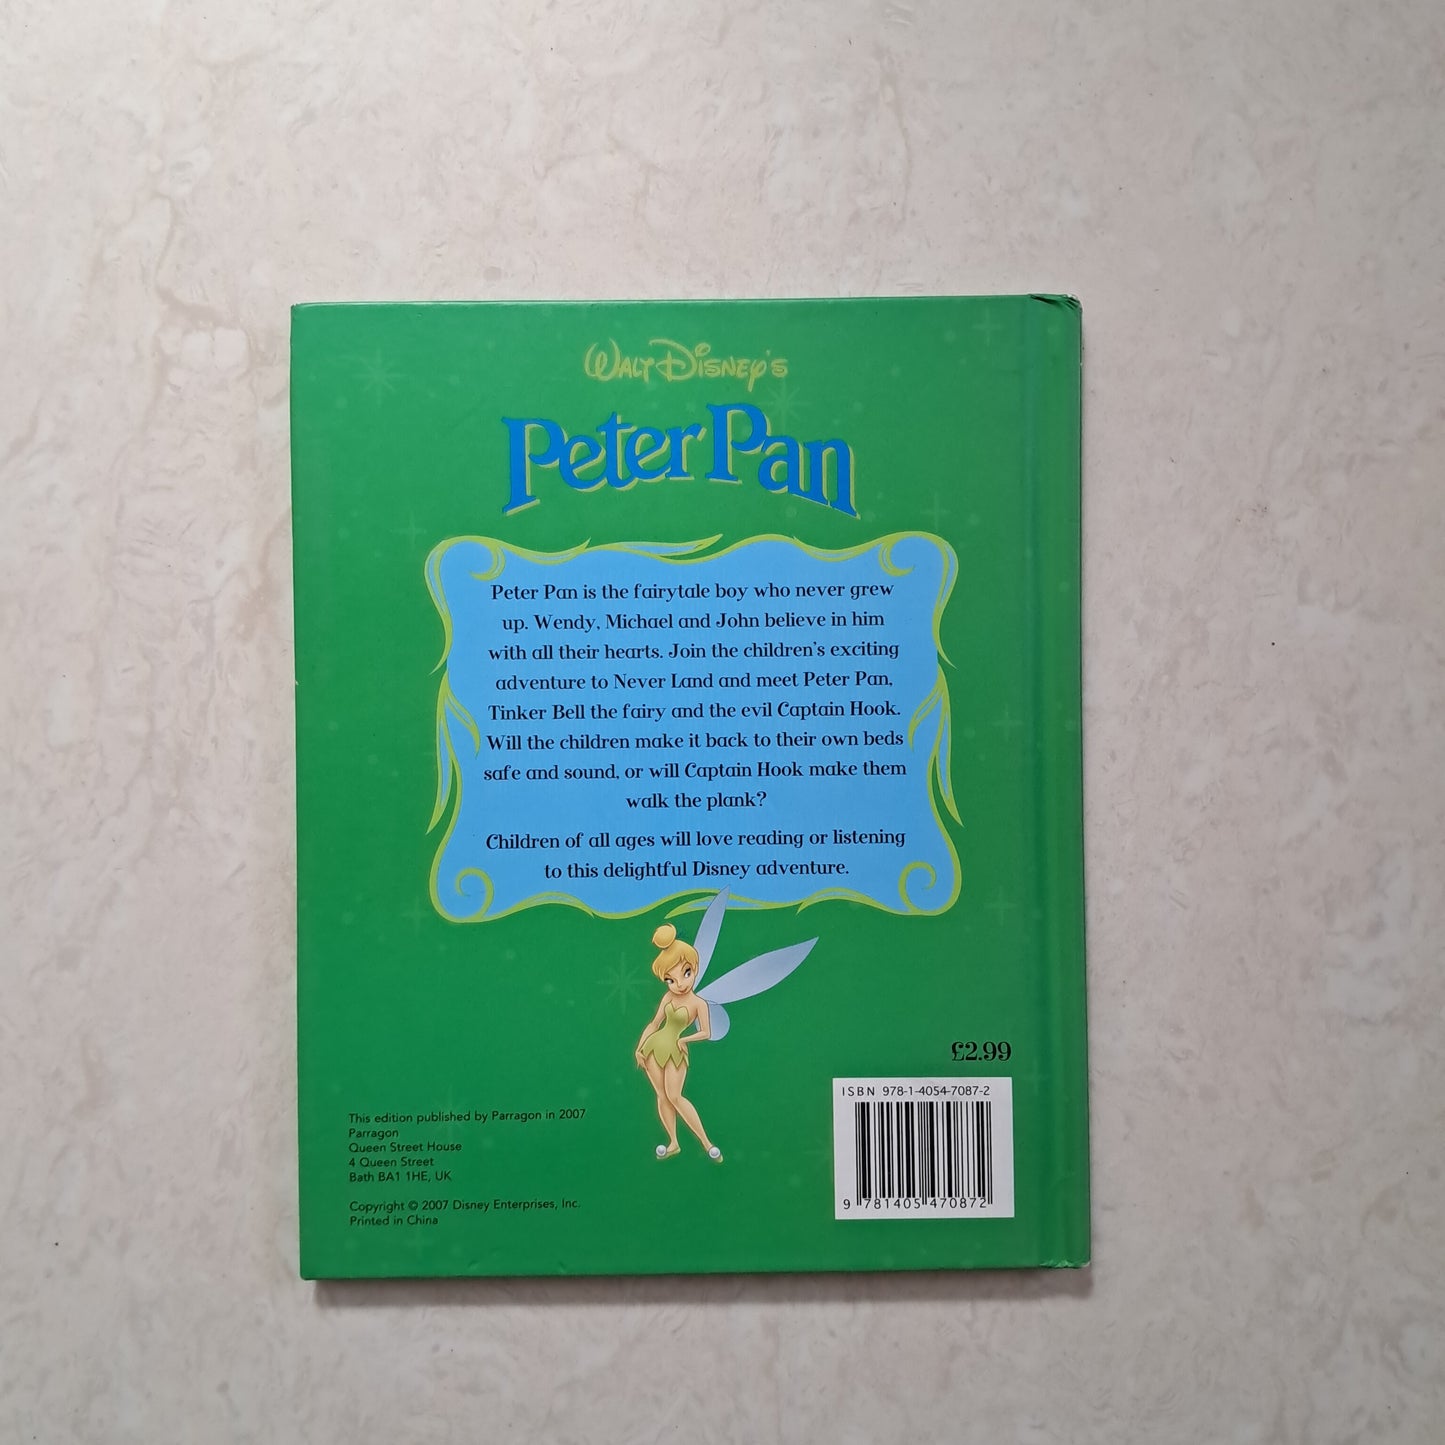 Peter Pan The magical story of the Disney movie